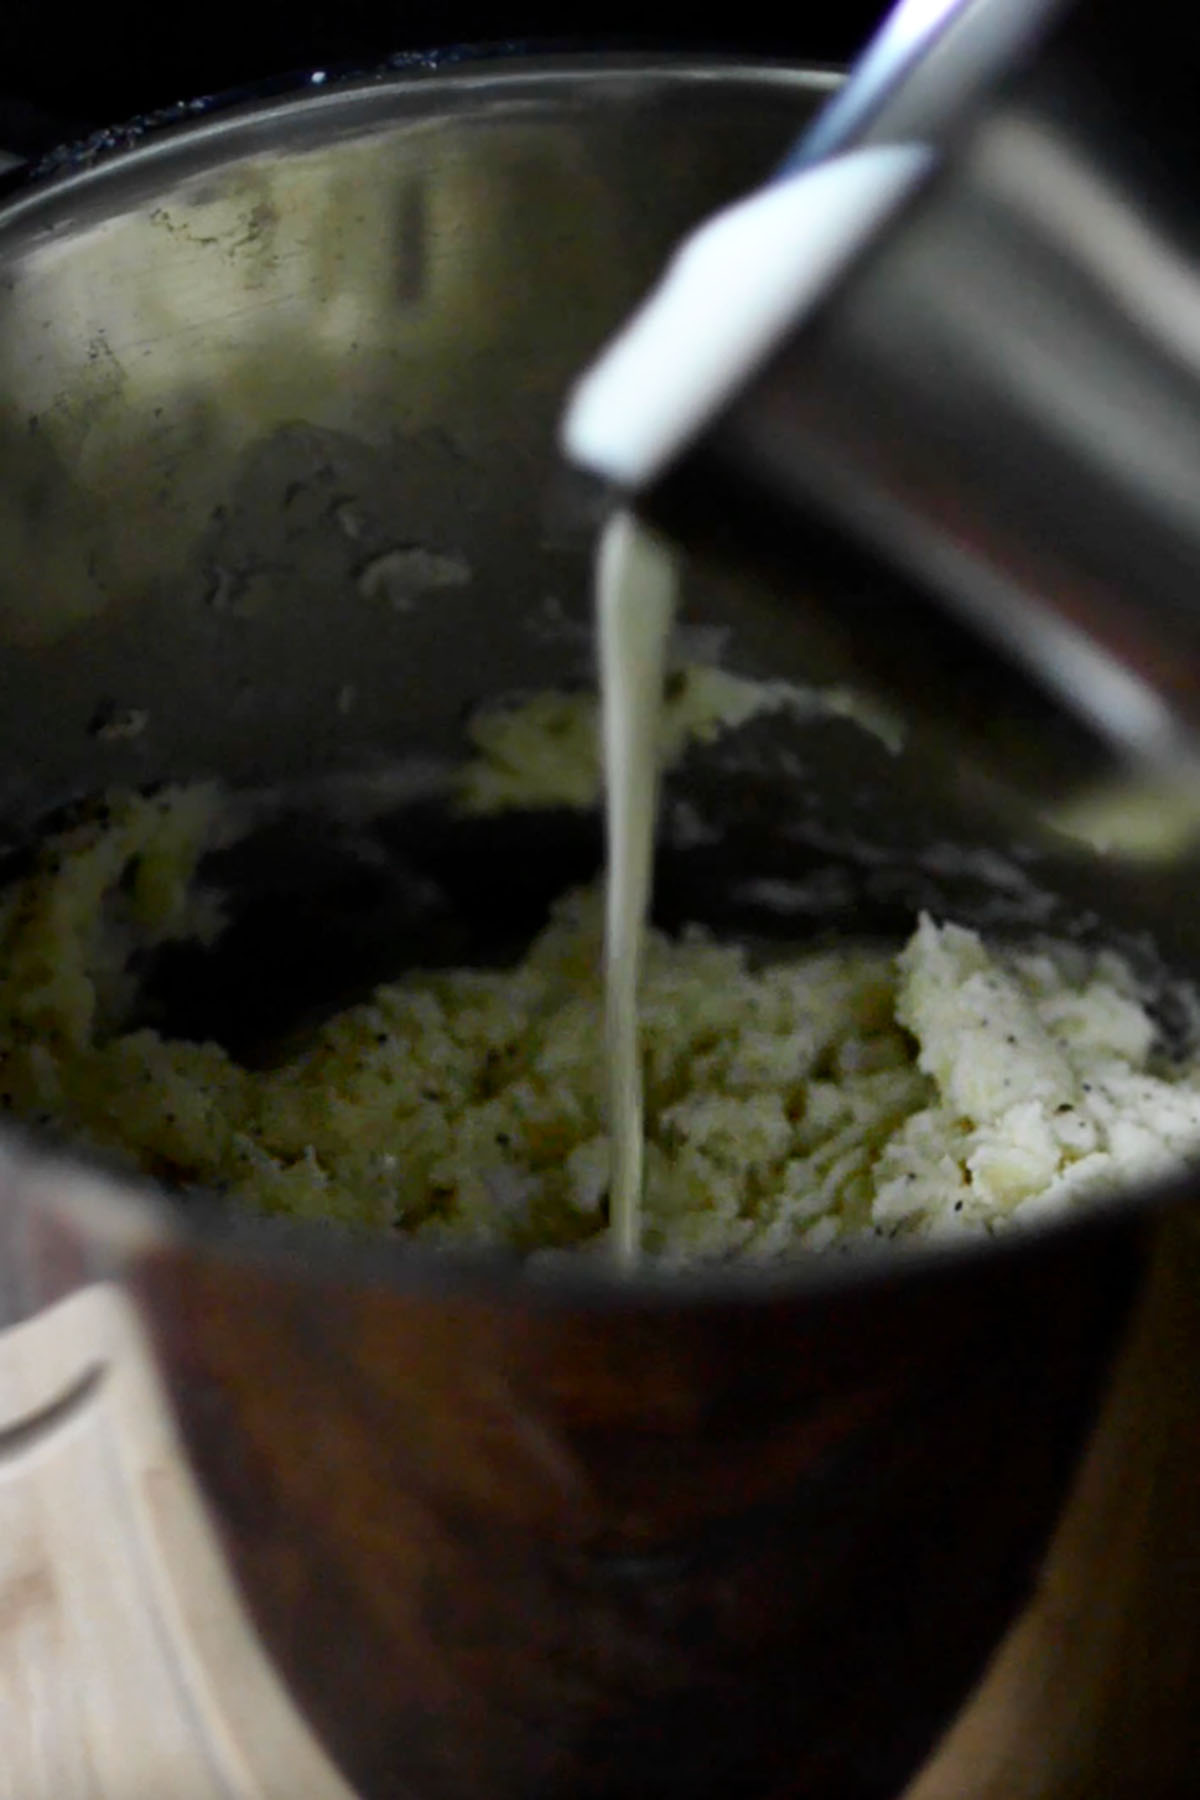 Garlic infused cream being poured into a mashed potato mixture.